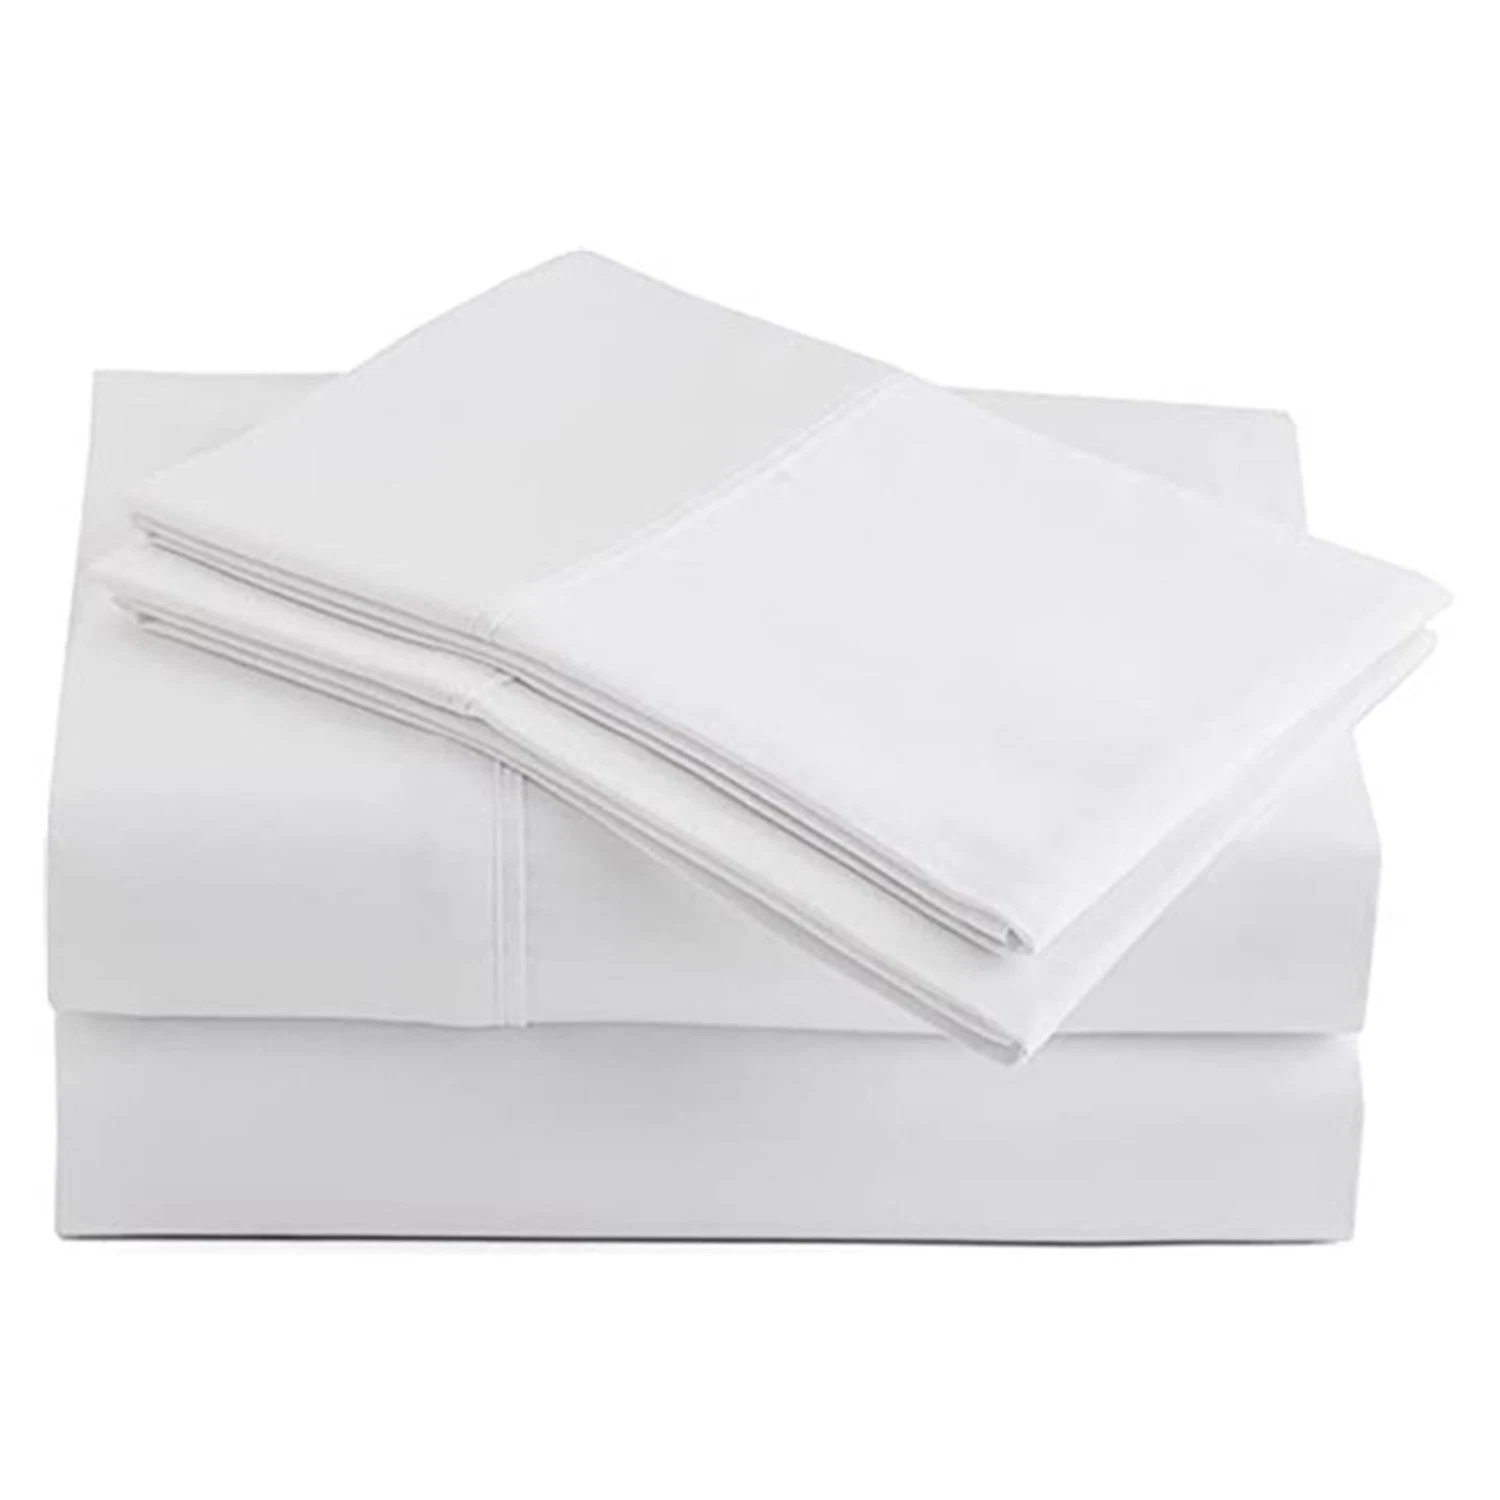 Disposable Sheets for Travel, Disposable Bed Sheets for Hotel, Disposable Sheets Sets